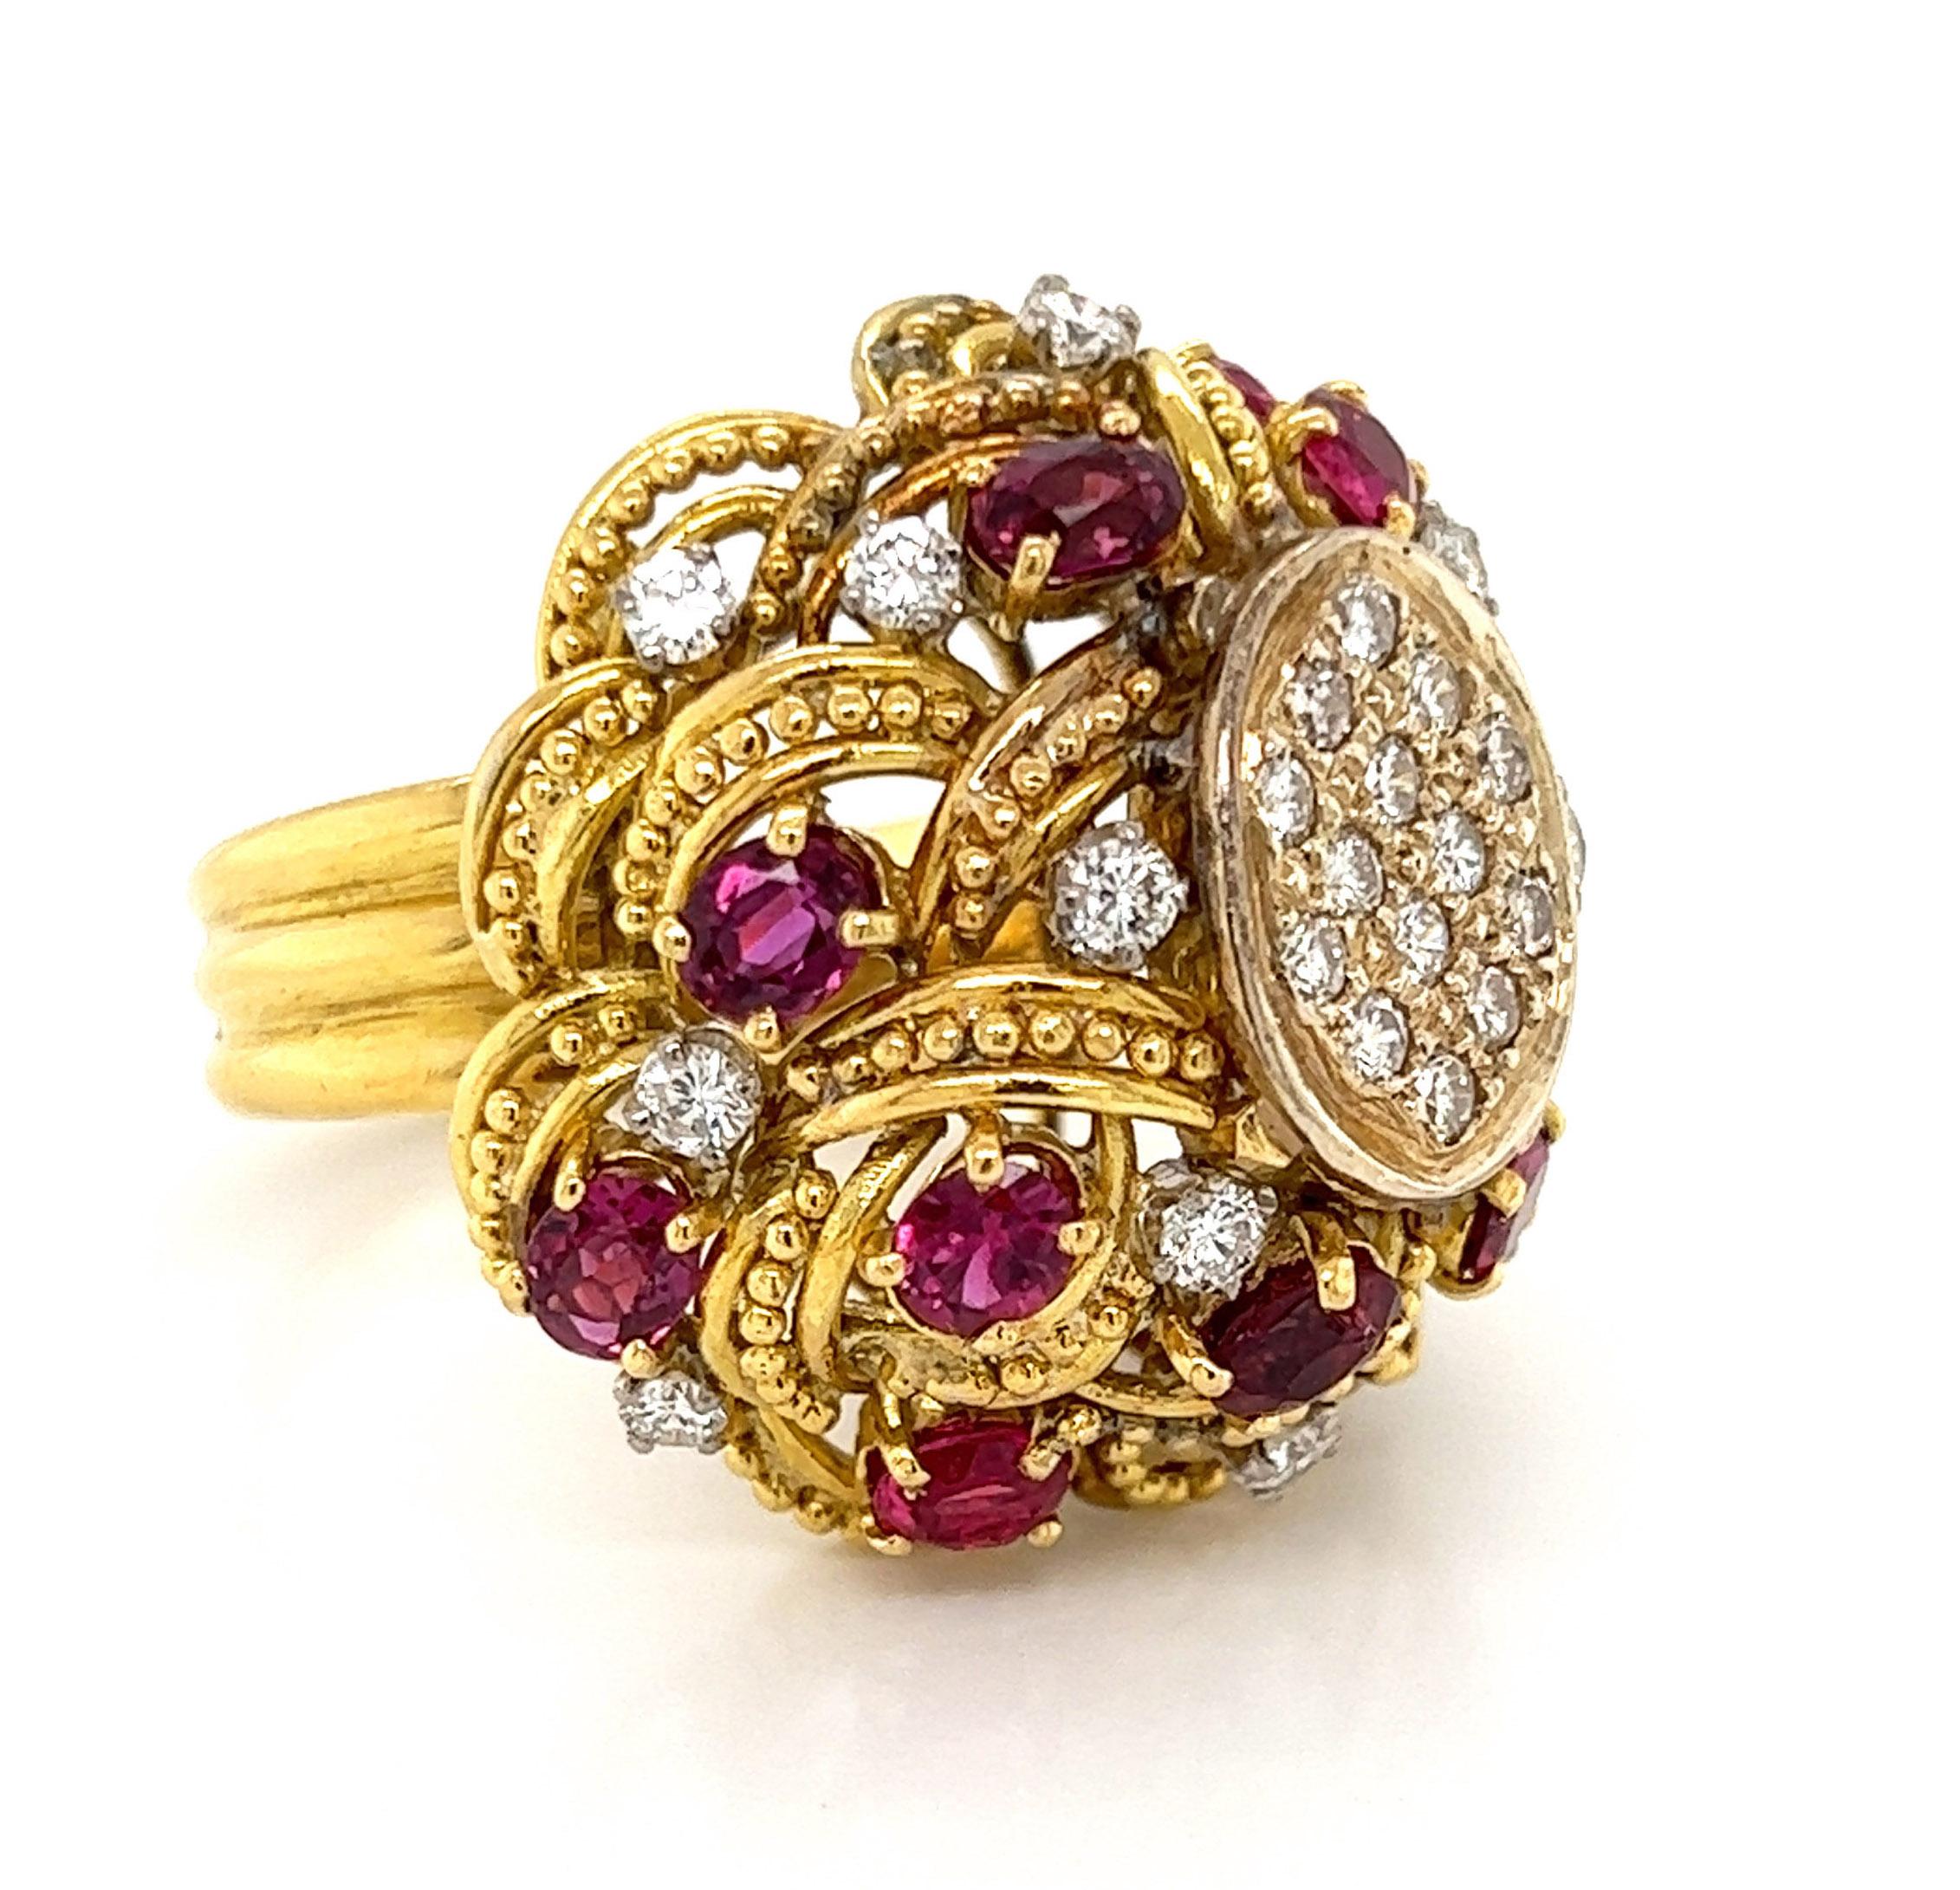 This particular ring is crafted from 18k yellow gold with a large dome shape fashioned from layered lace like pattern with small beads across each loop and has small open space between each layer. Around the dome has round cut rubies in yellow gold